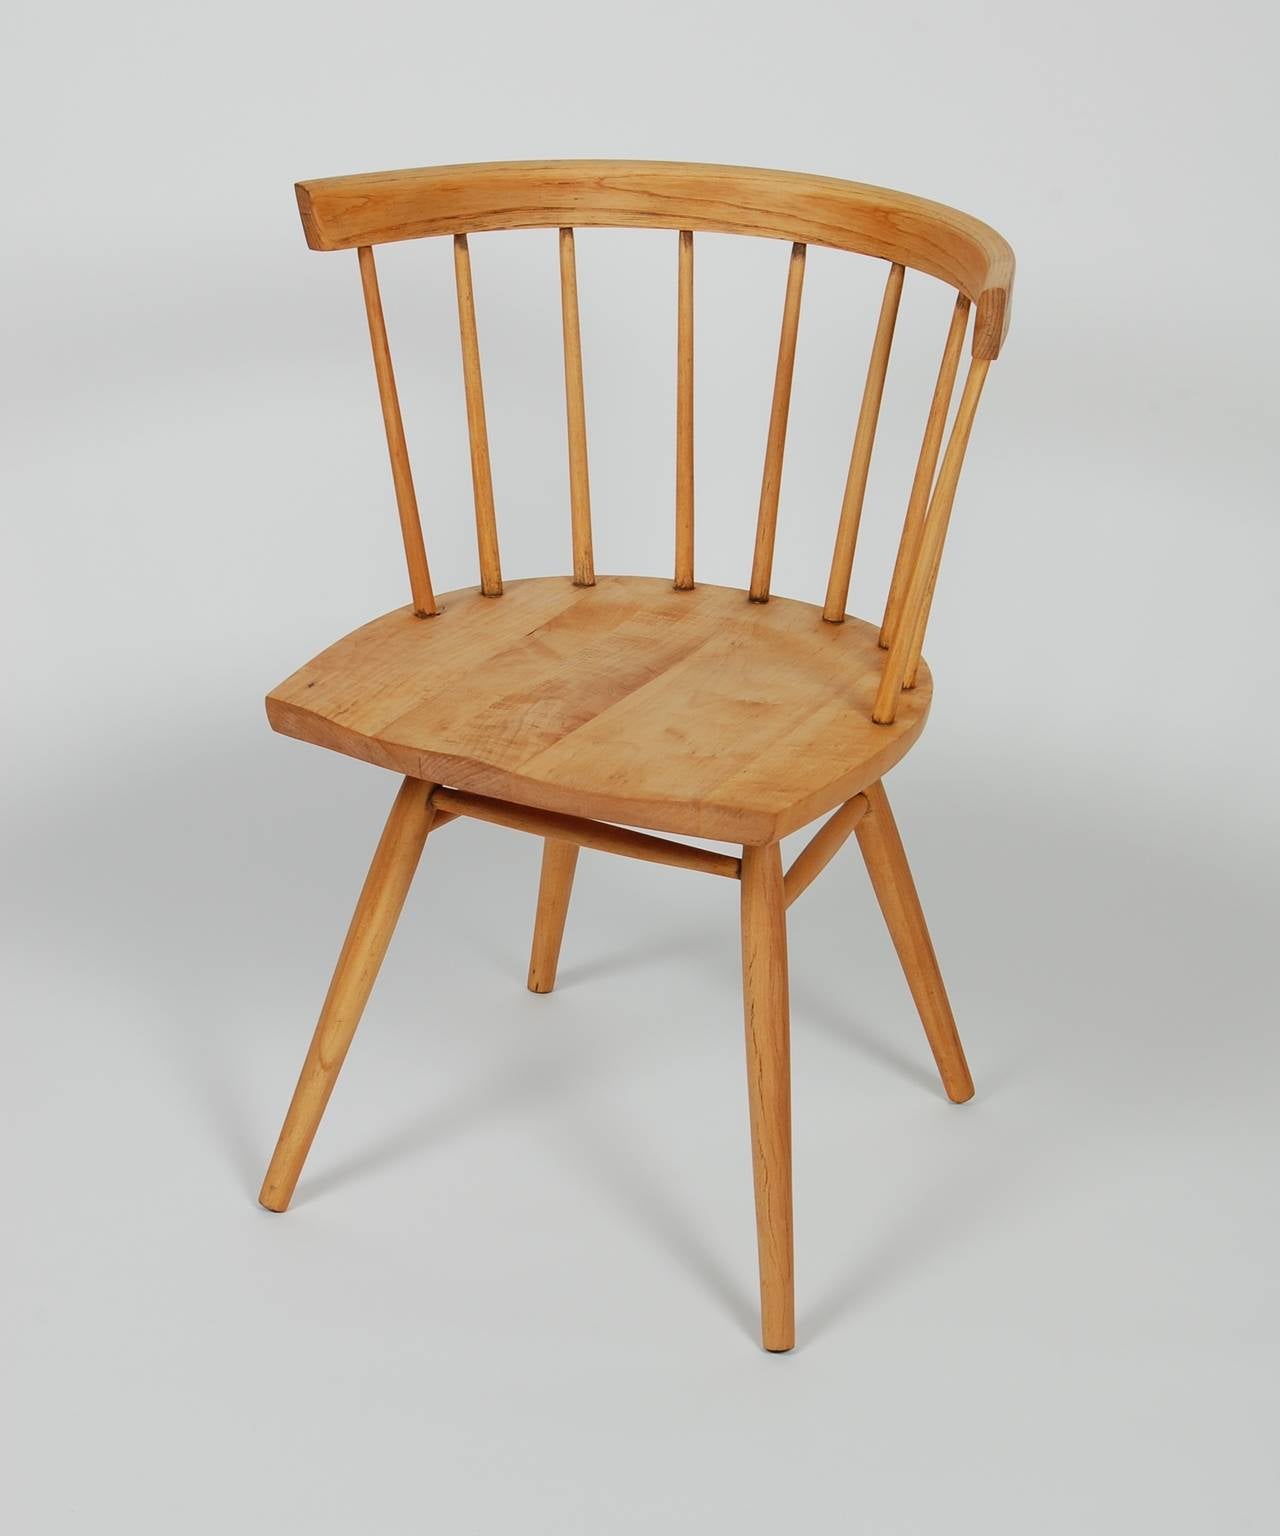 Original straight back chair (N19) designed by George Nakashima and produced by Knoll from 1946 to 1954. Made of maple an American hardwood, the style is a modernized version of the Classic Windsor chair. Having a curved back with spindles and